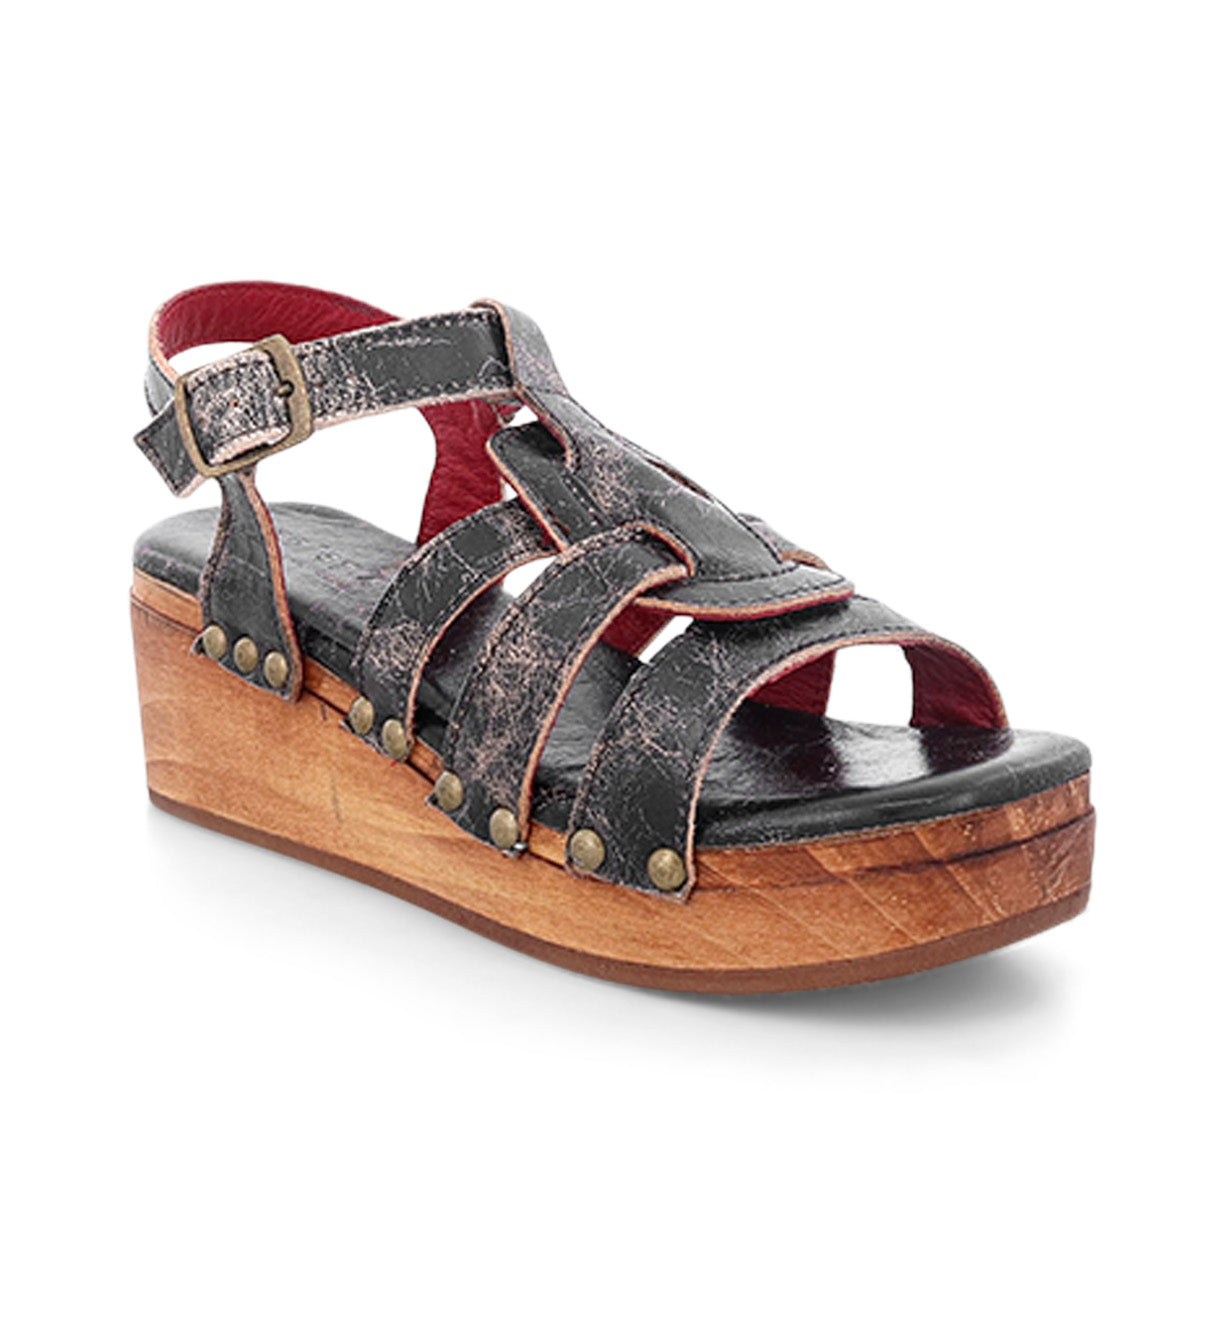 A women's black and wood platform sandal with straps called Fabiola by Bed Stu.